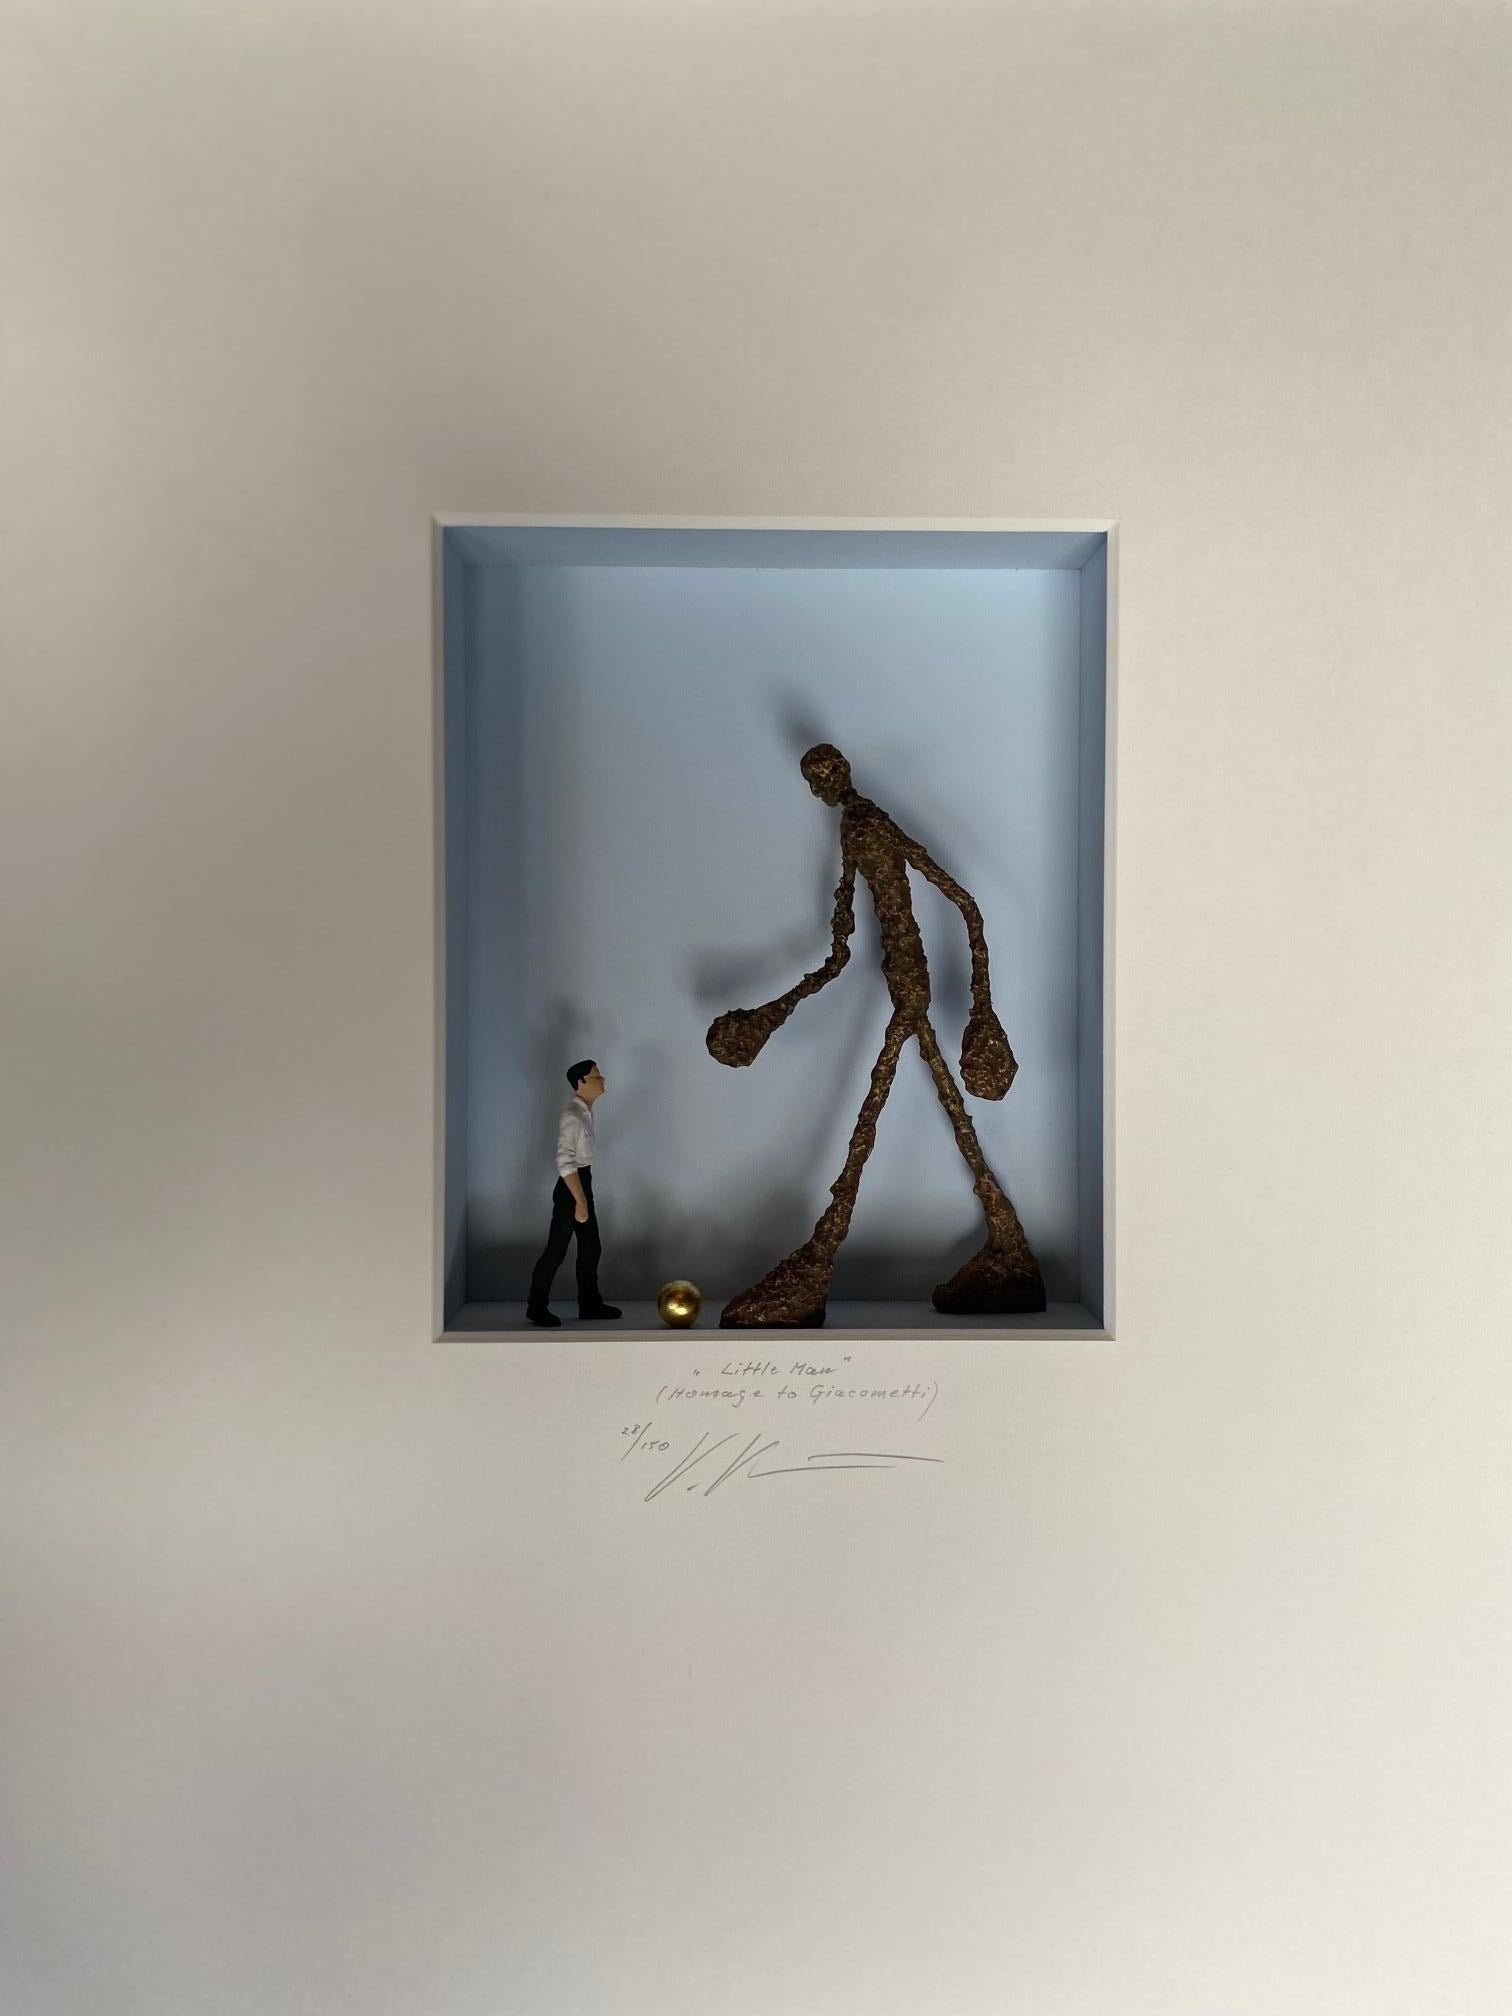 Little Man - Homage to Giacometti minimalist artwork by Volker Kuhn 3